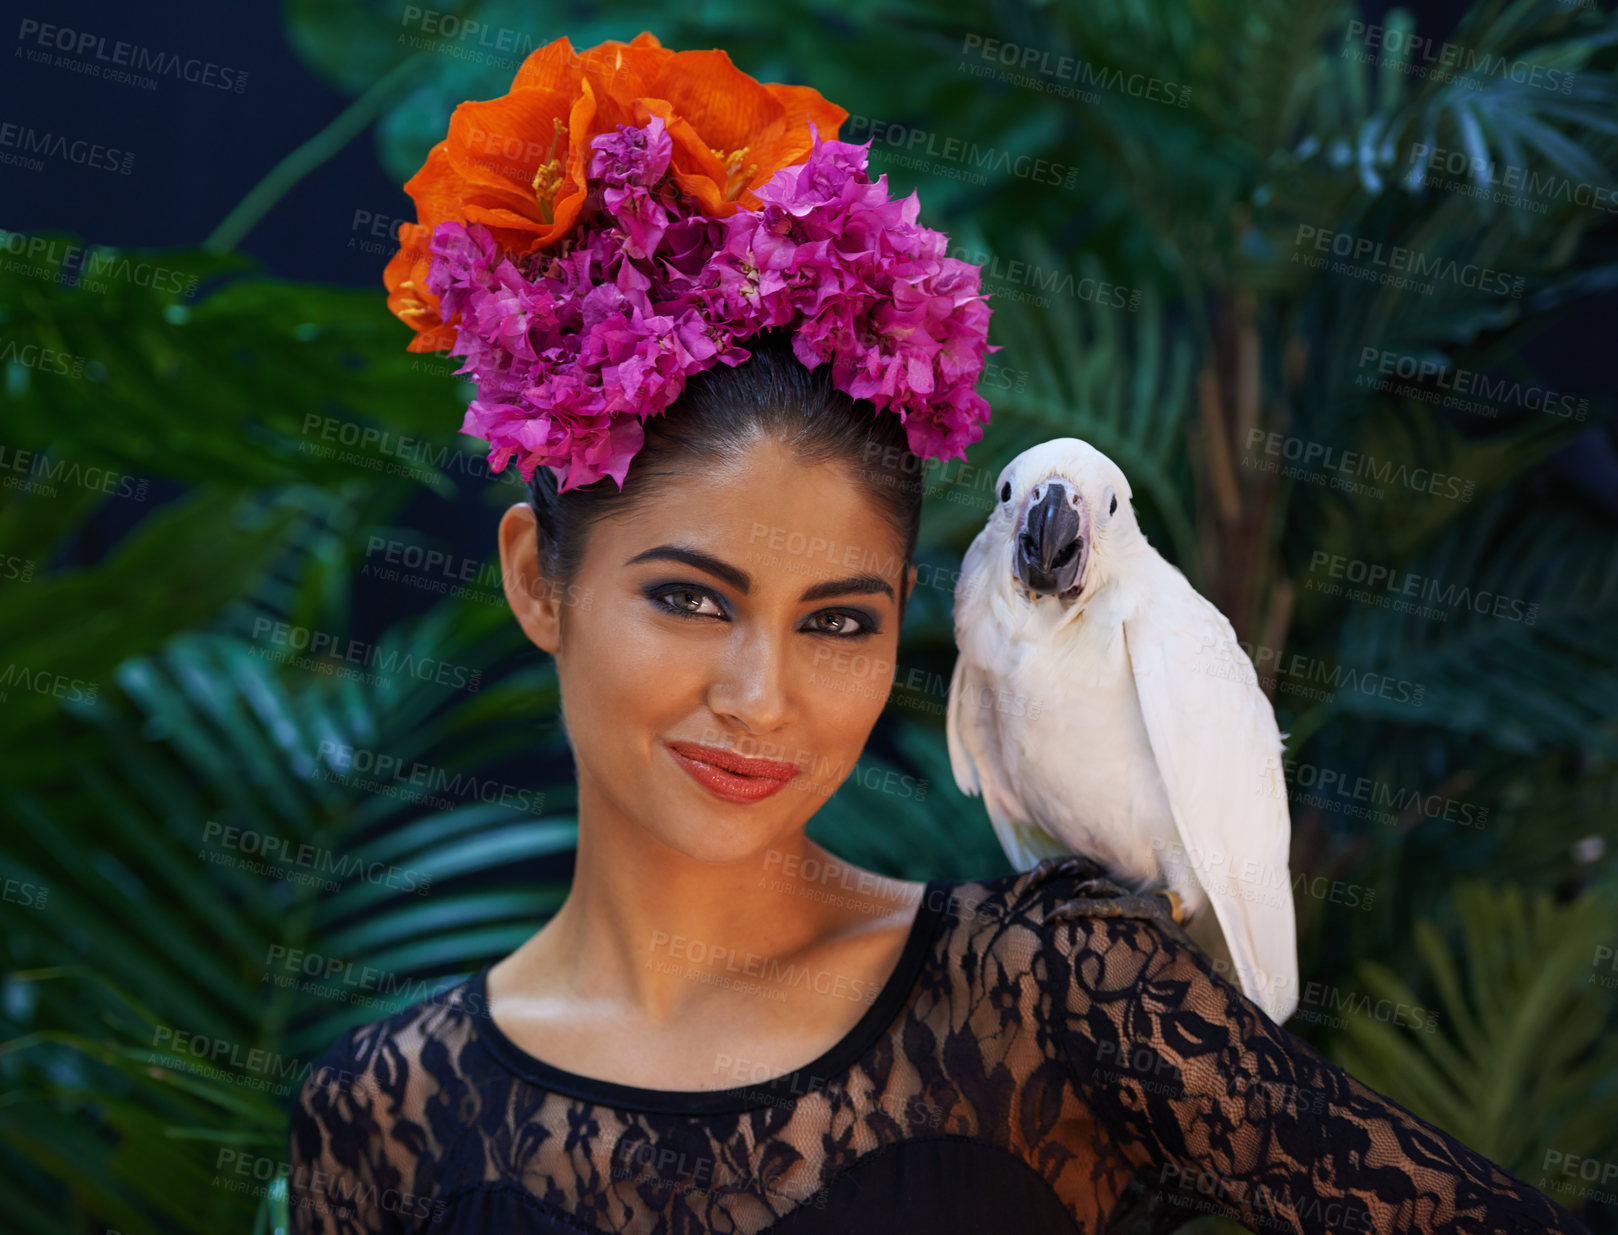 Buy stock photo Jungle, portrait or woman with flowers or parrot, natural cosmetics for wellness in nature aesthetic. Smile, animal or female Indian model in rainforest for skincare beauty, pet bird or floral art